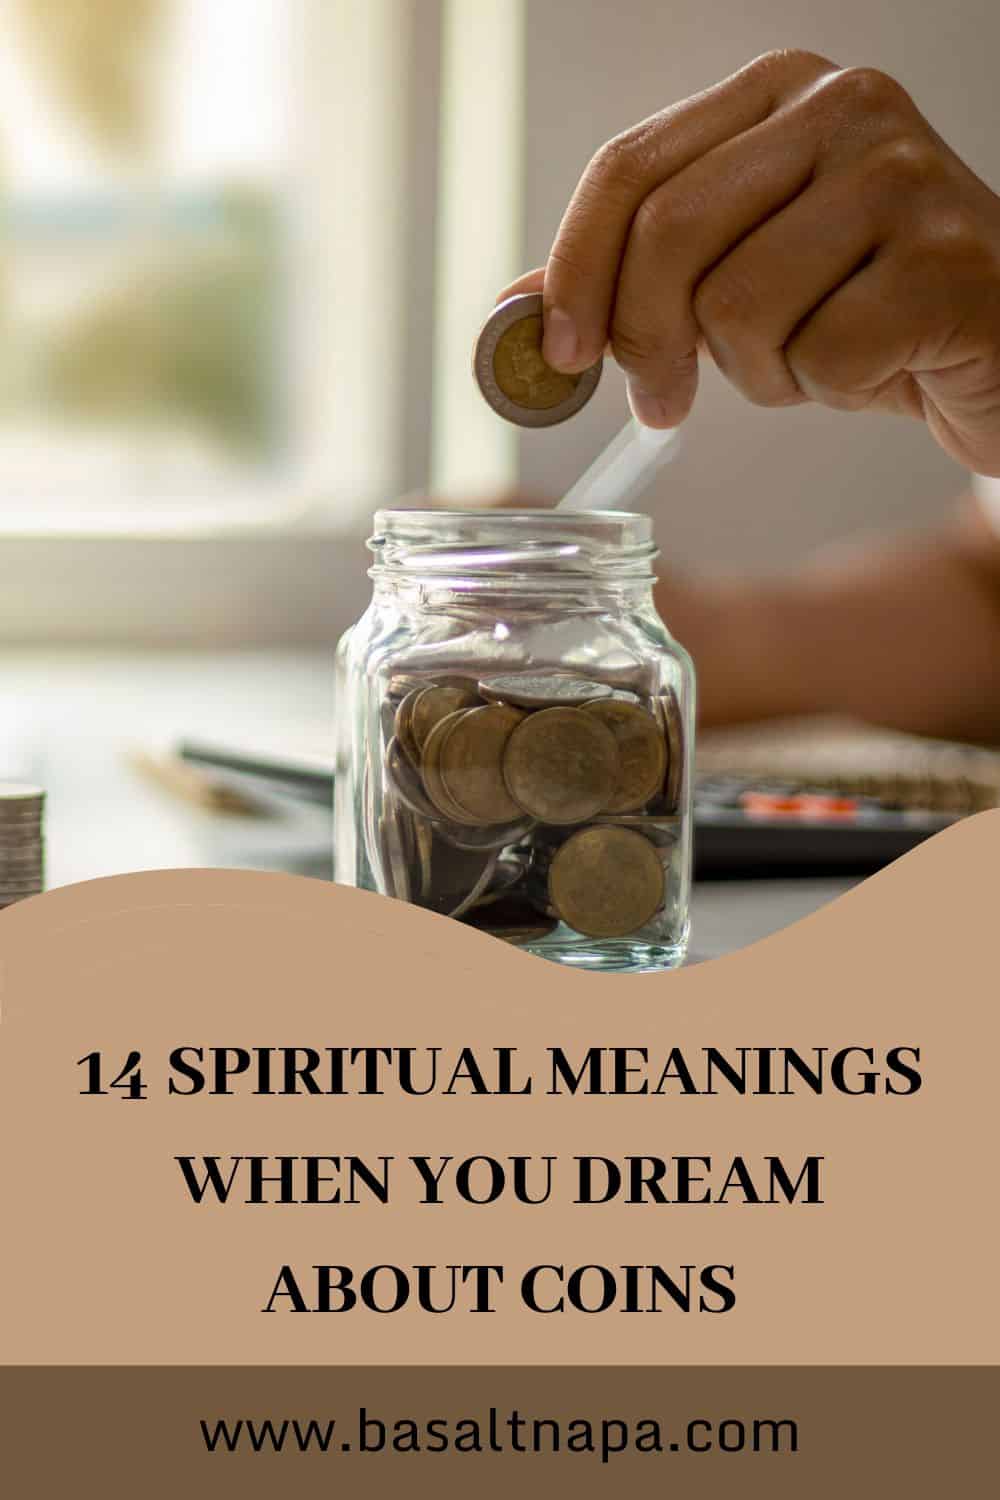 14 Spiritual Meanings When You Dream About Coins